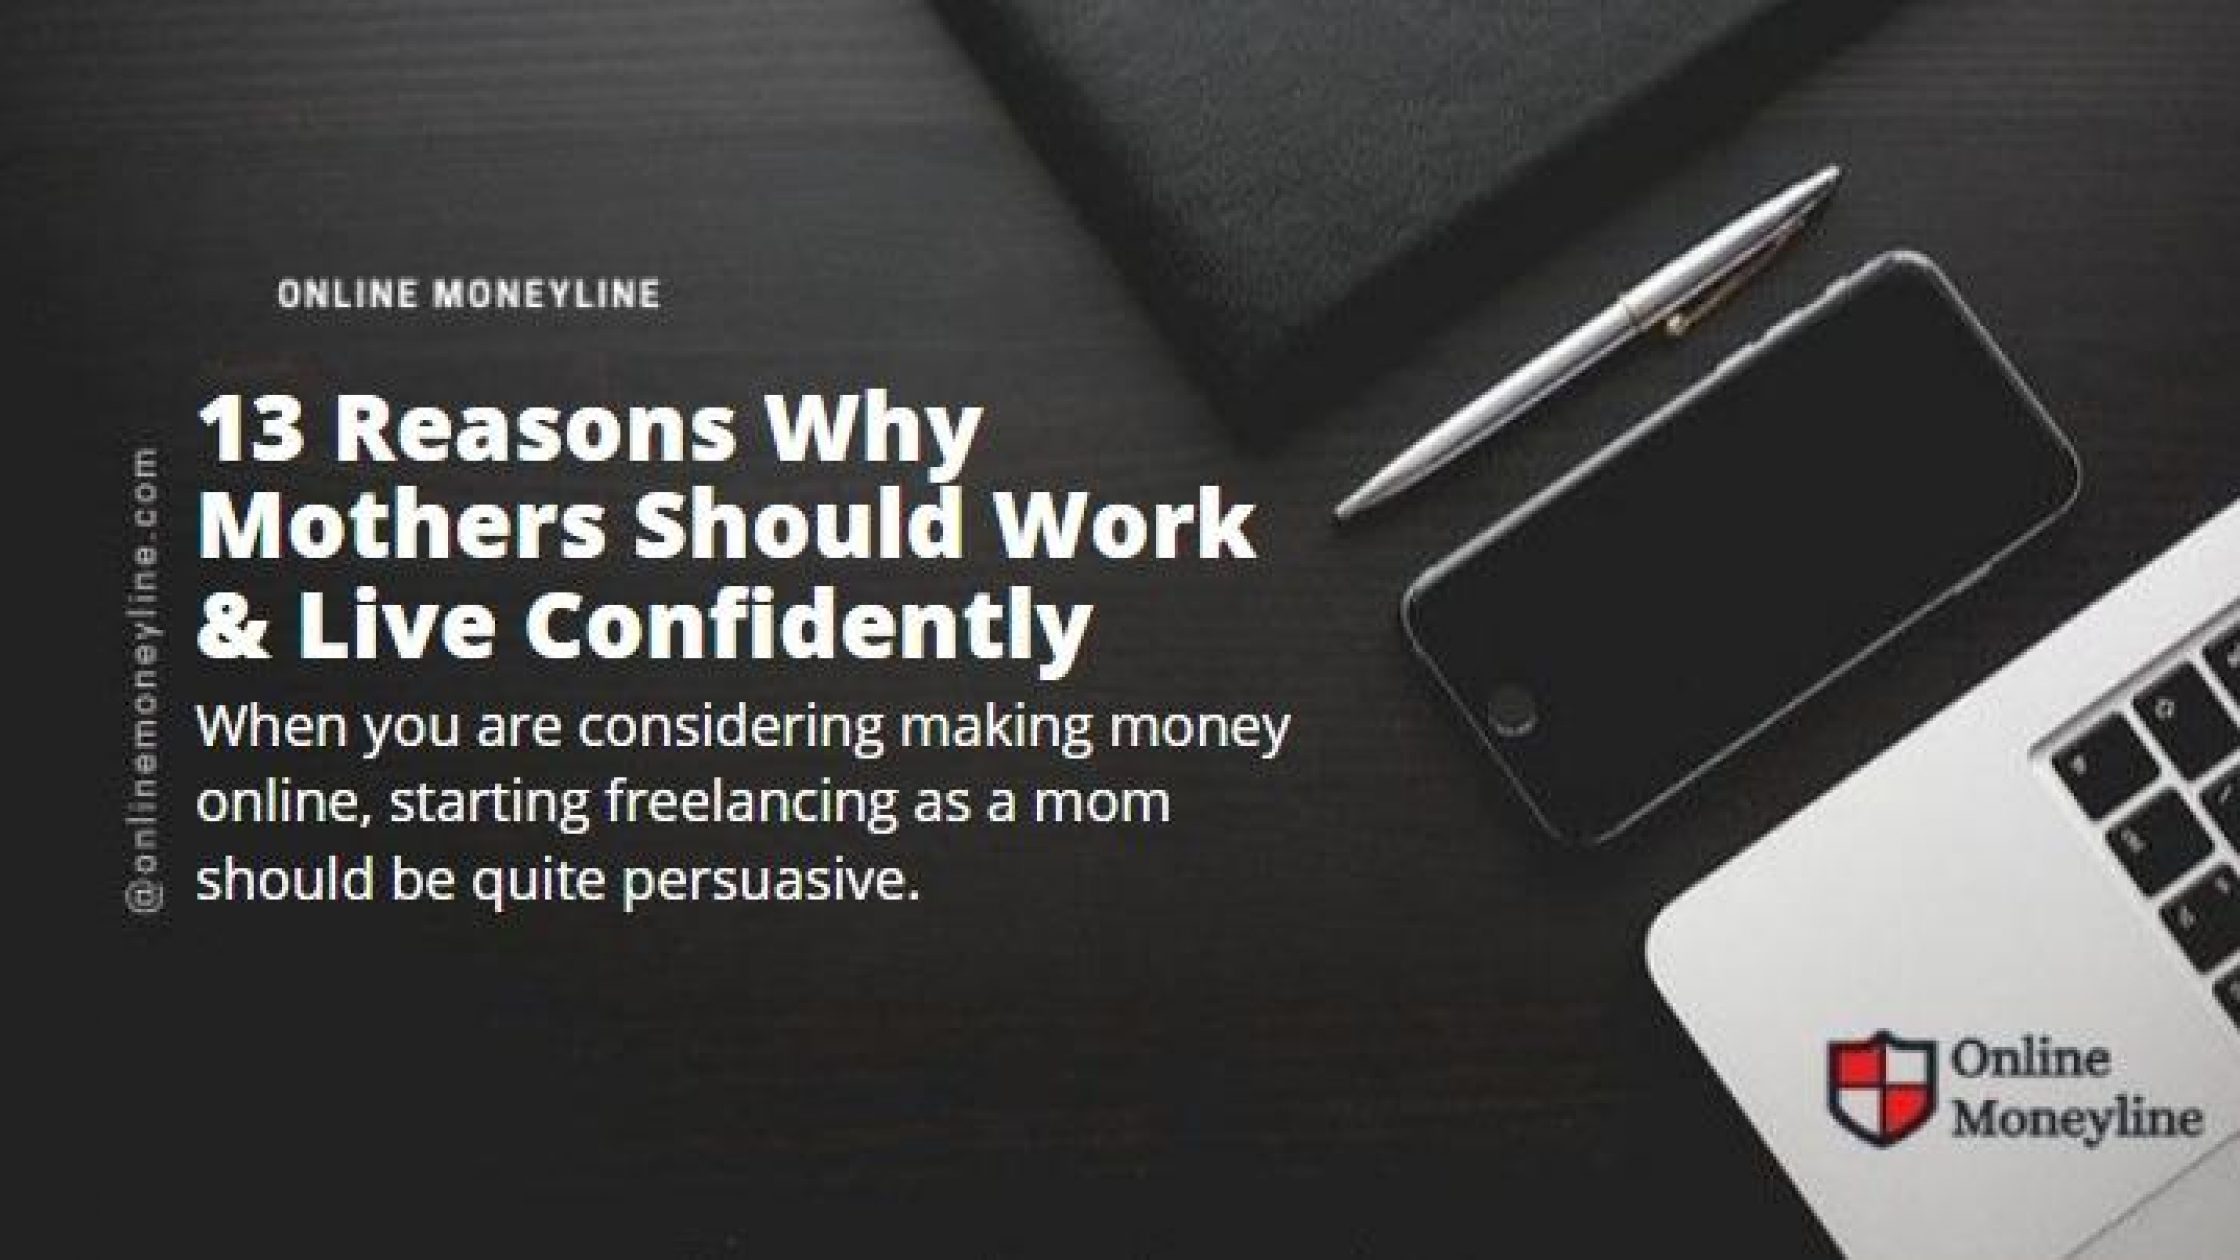 13 Reasons Why Mothers Should Work & Live Confidently